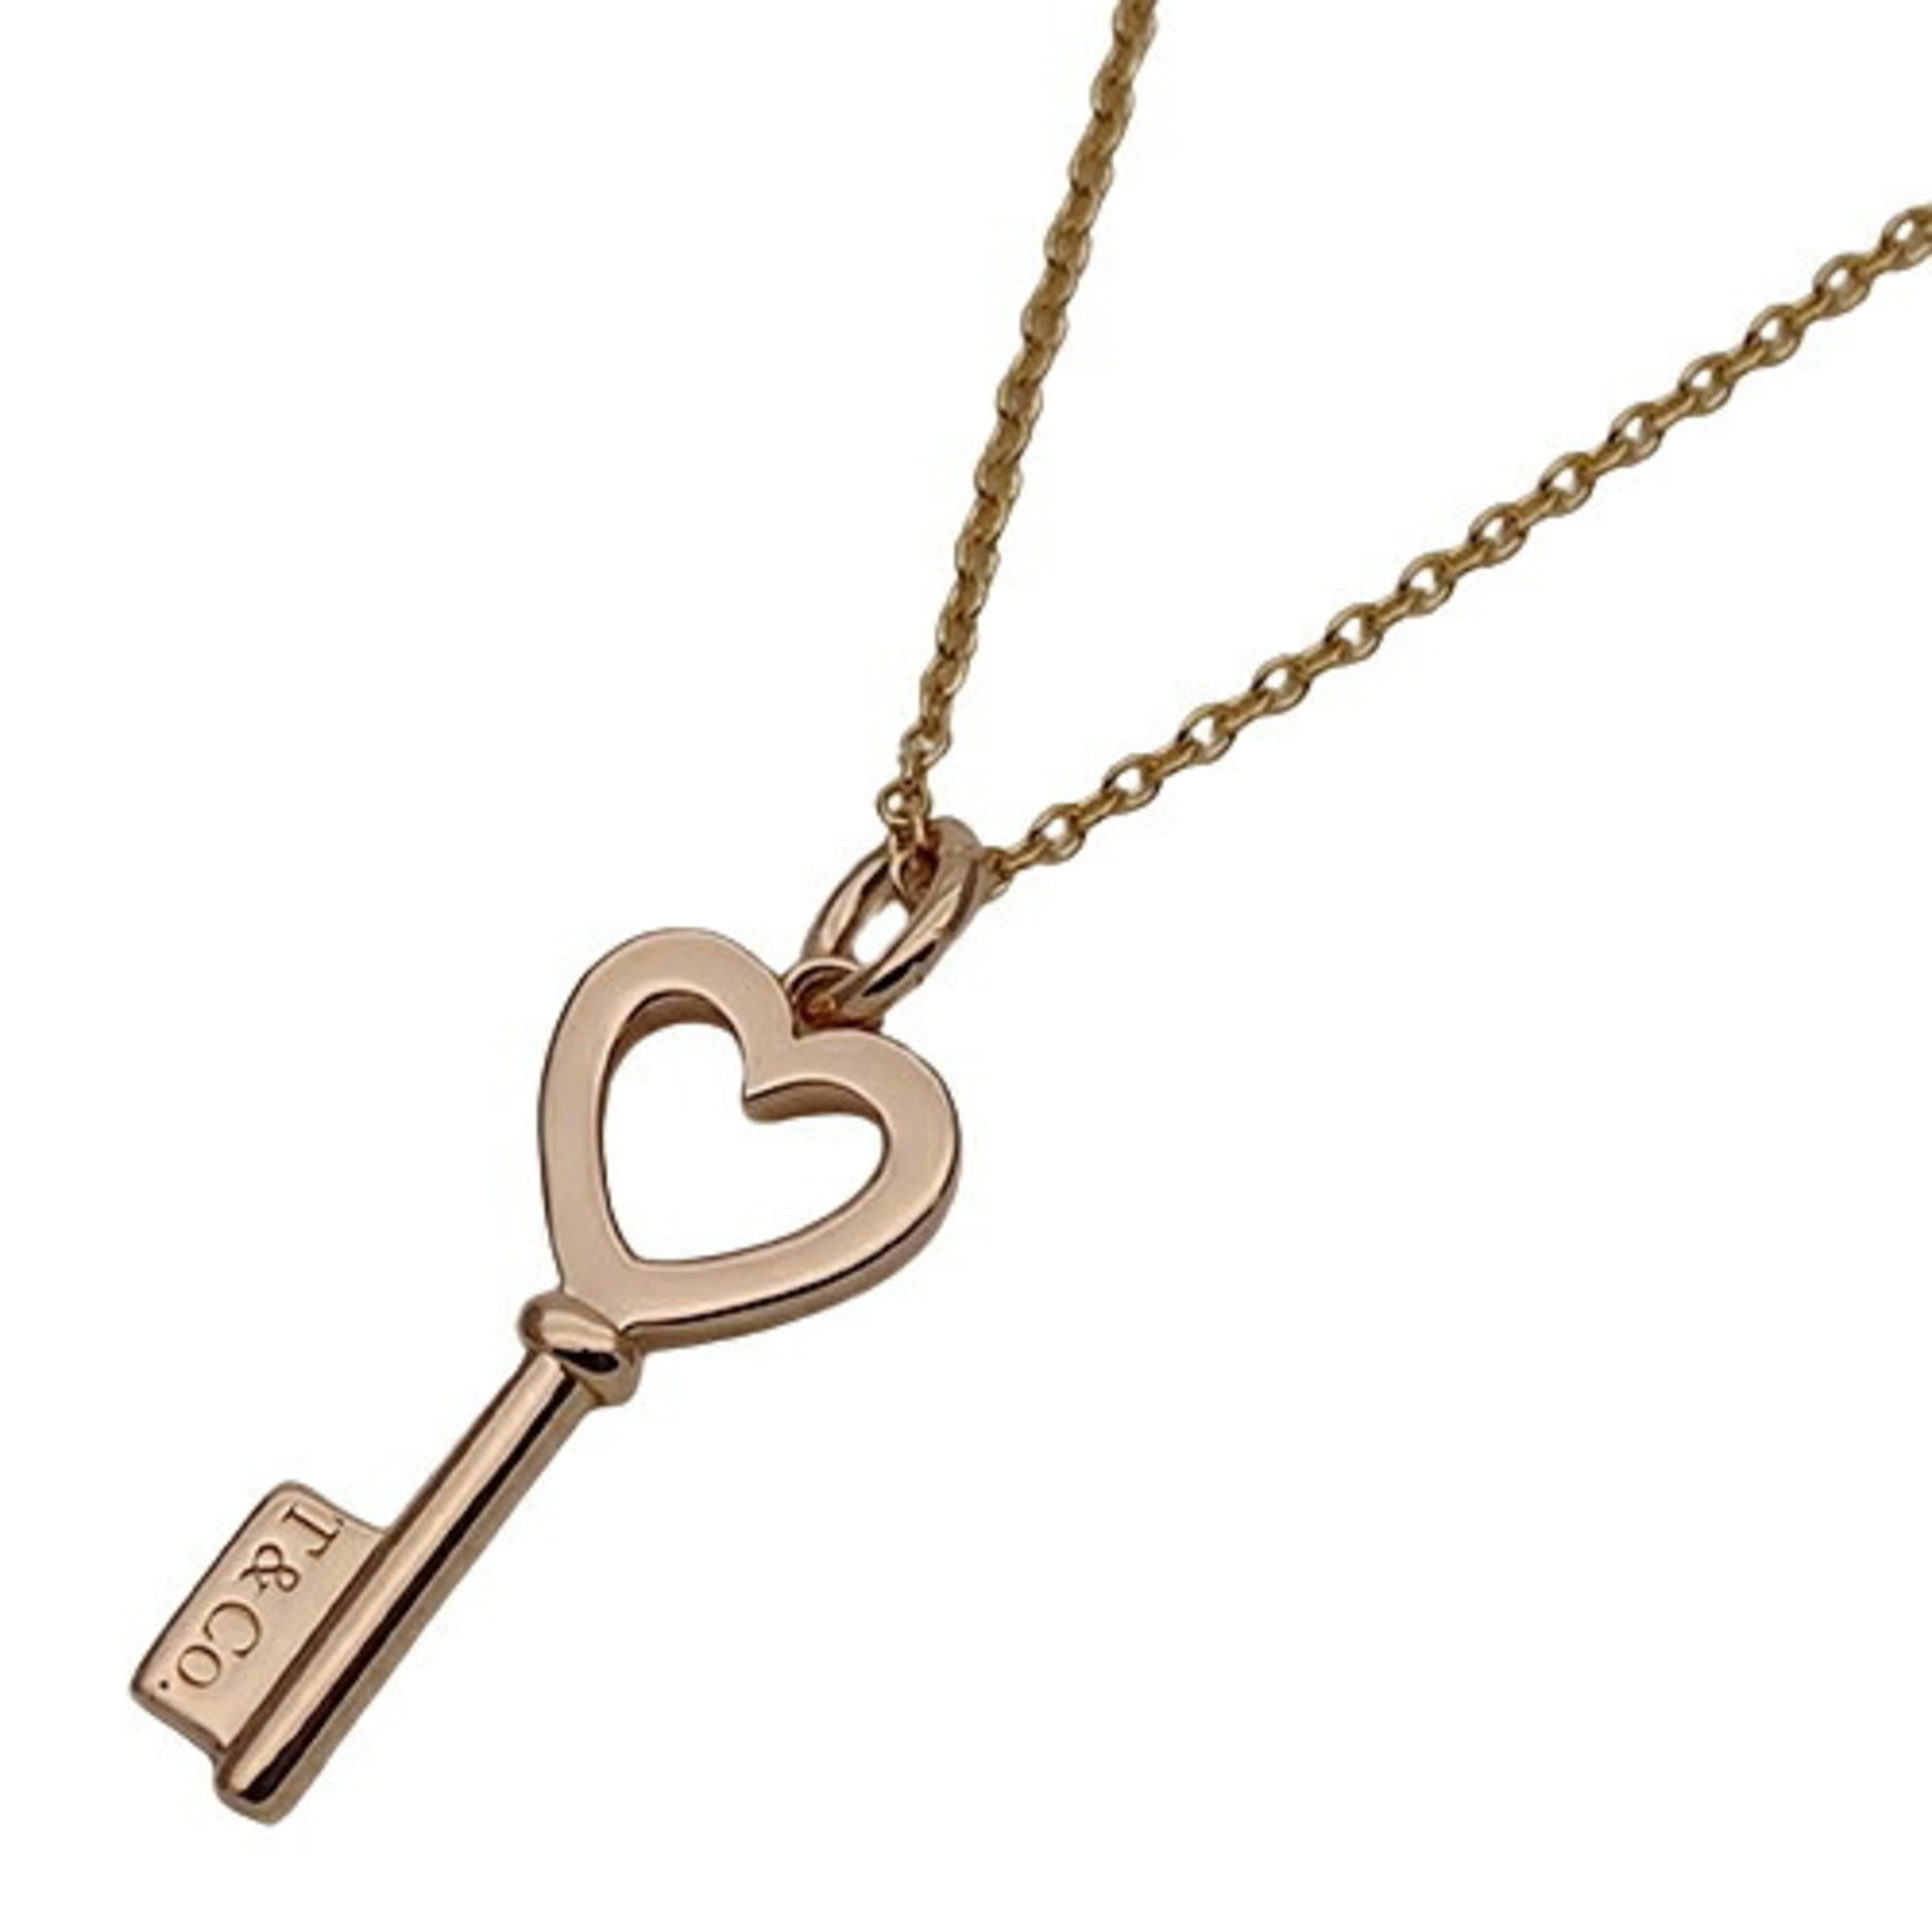 Tiffany & Co. Necklace for women, 750PG, heart key, pink gold, polished